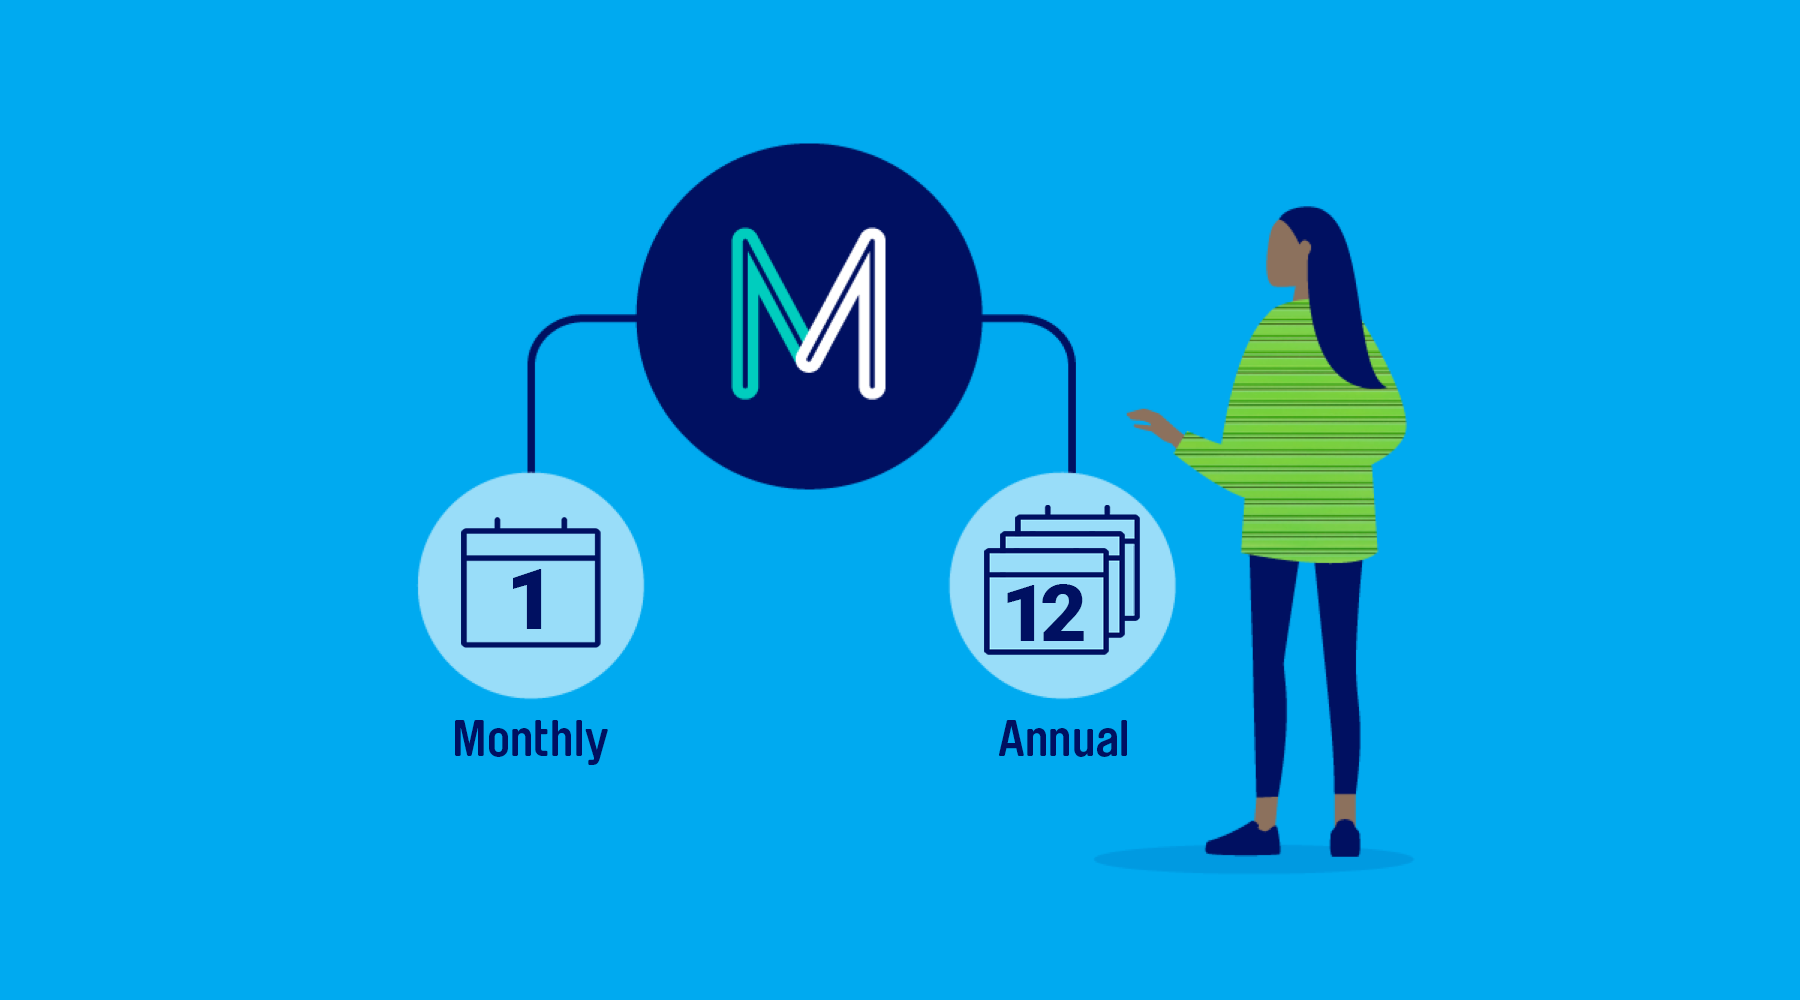 Illustration of a woman standing in front of a flow chart graphic. The top circle contains the MarketFinance "M" icon, and two branches lead off it. One says "Monthly" and the other says "Annual"